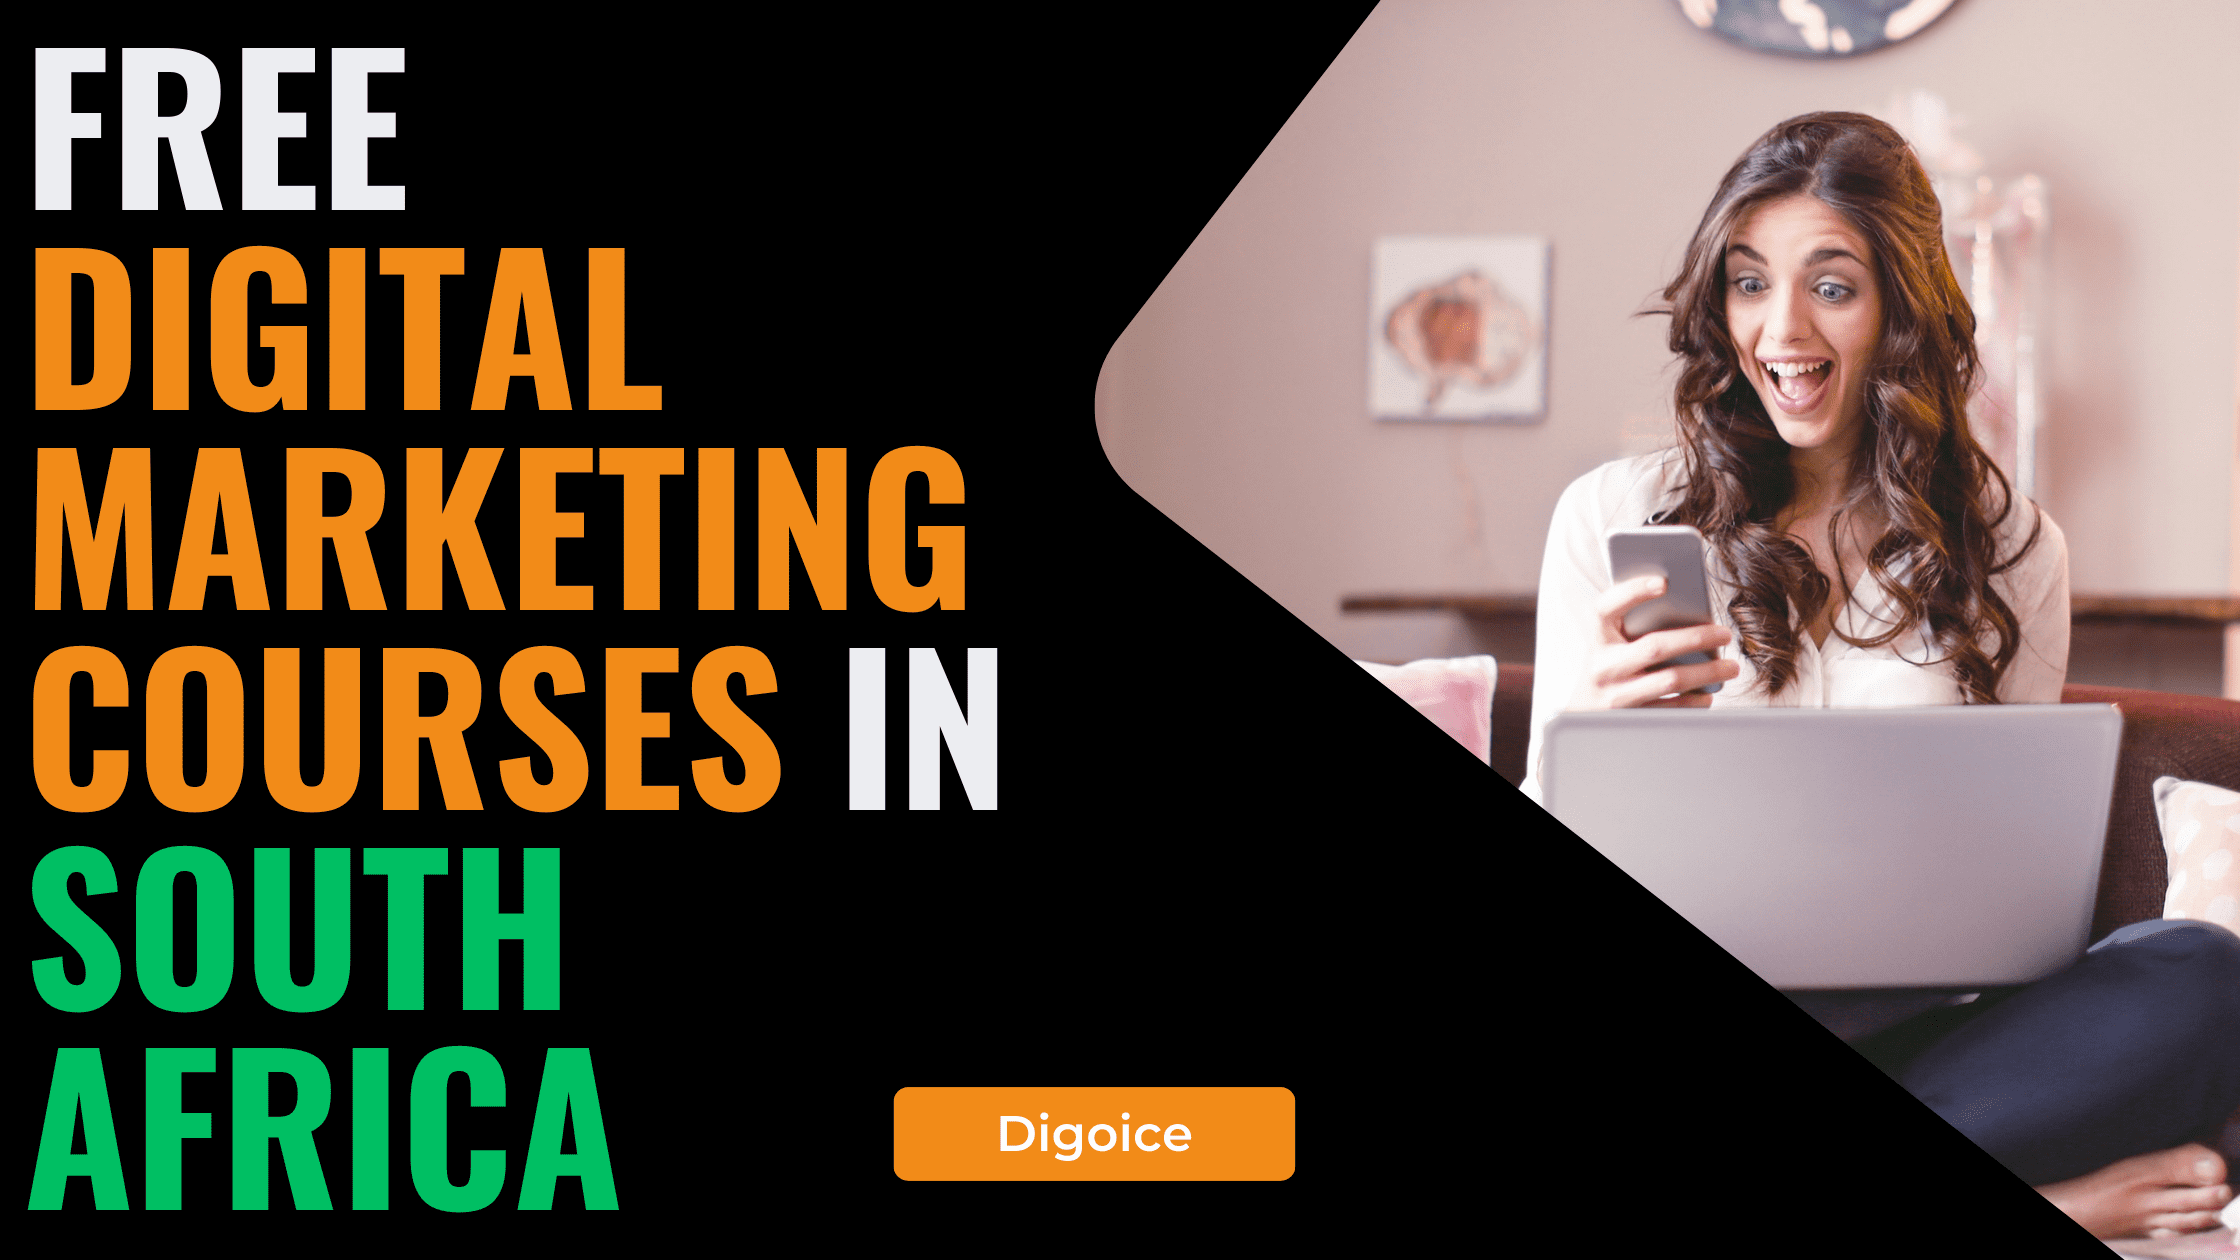 Free Digital Marketing Courses in South Africa